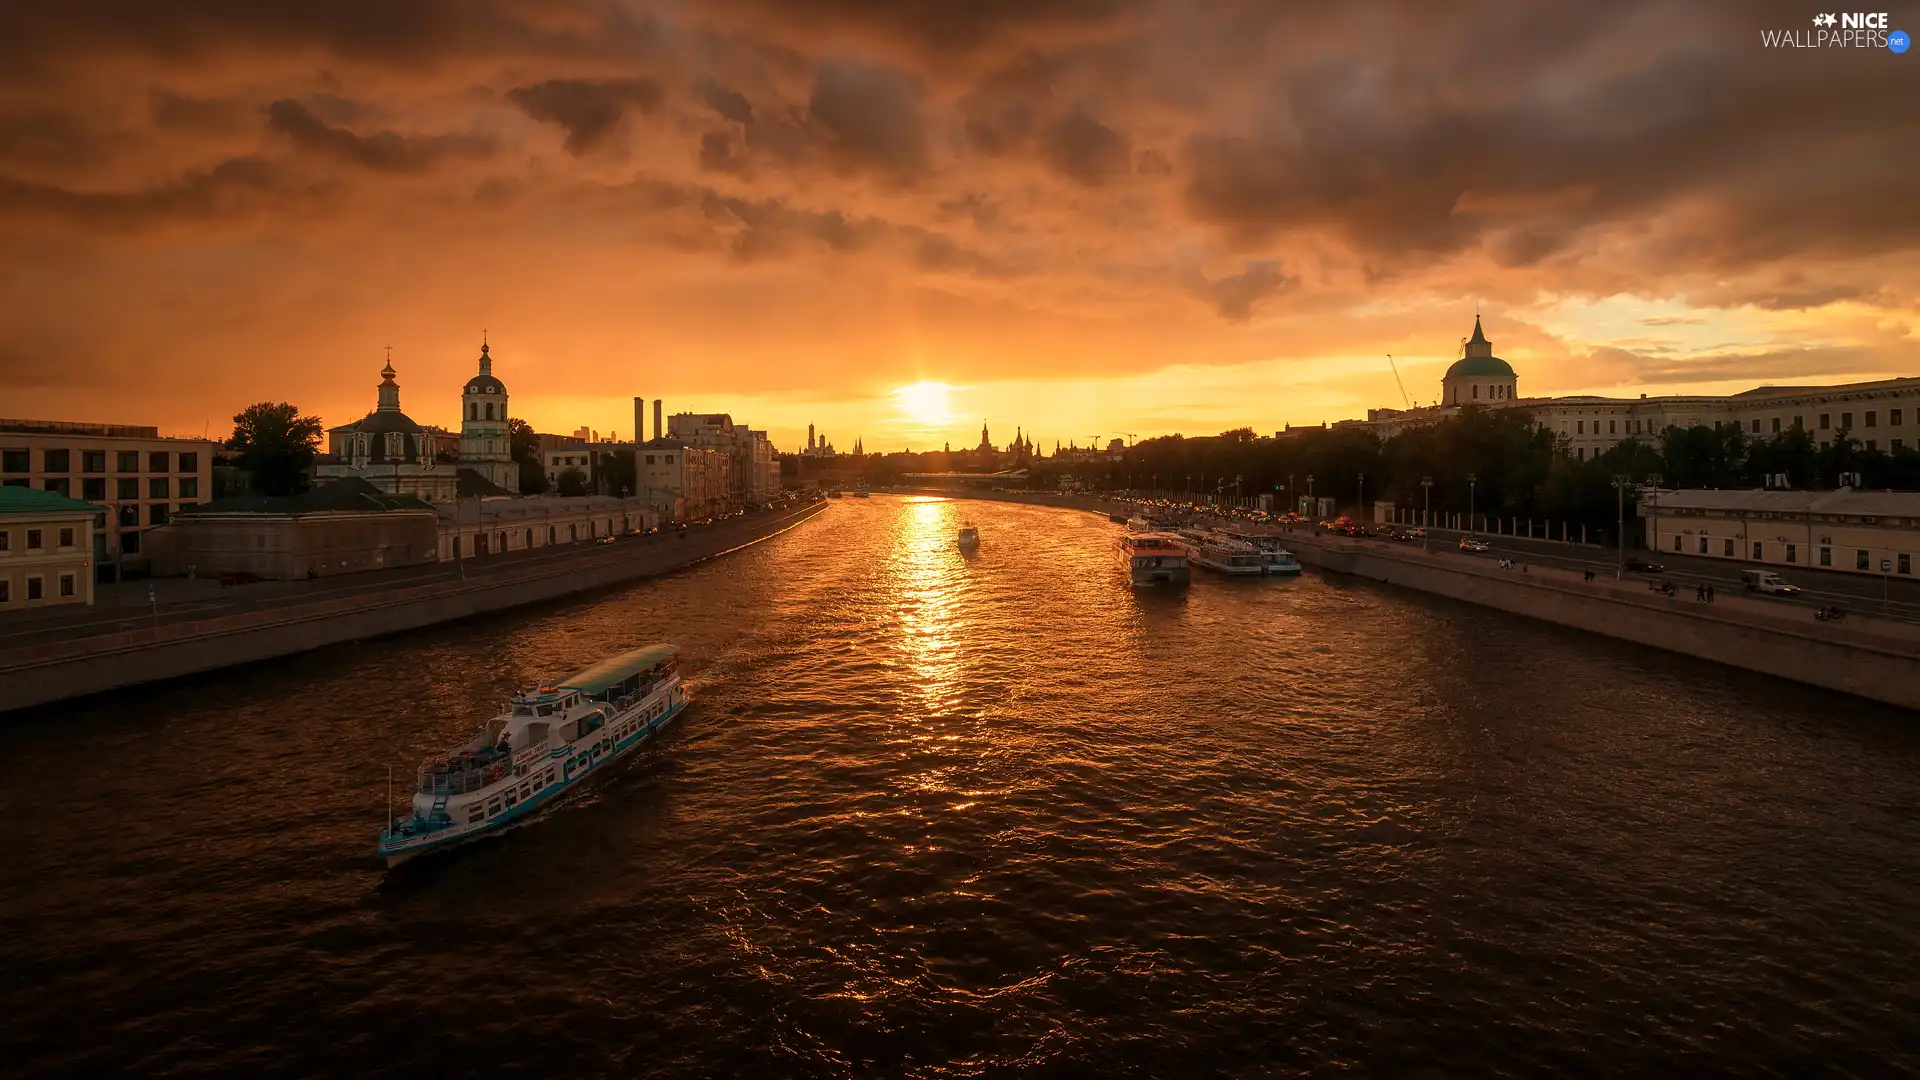 Houses, vessels, Moscow, Churches, Moscow River, Great Sunsets, Russia